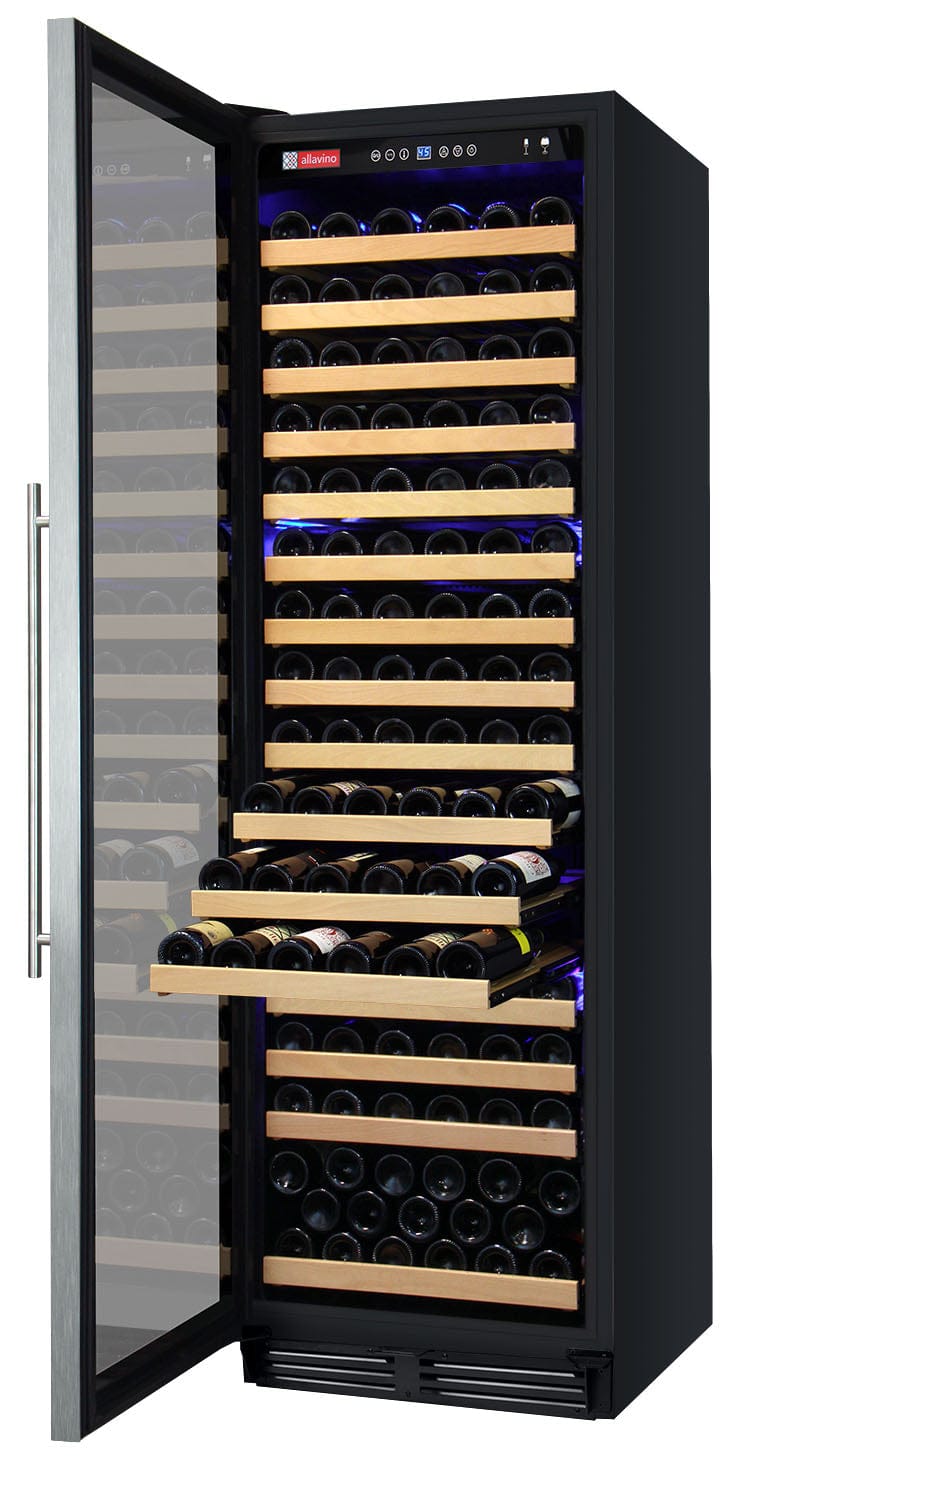 Allavino 174 Bottle Single Zone 24 Inch Wide Wine Cooler in stainless steel. Facing left with door open and three shelves out full of wine bottles.